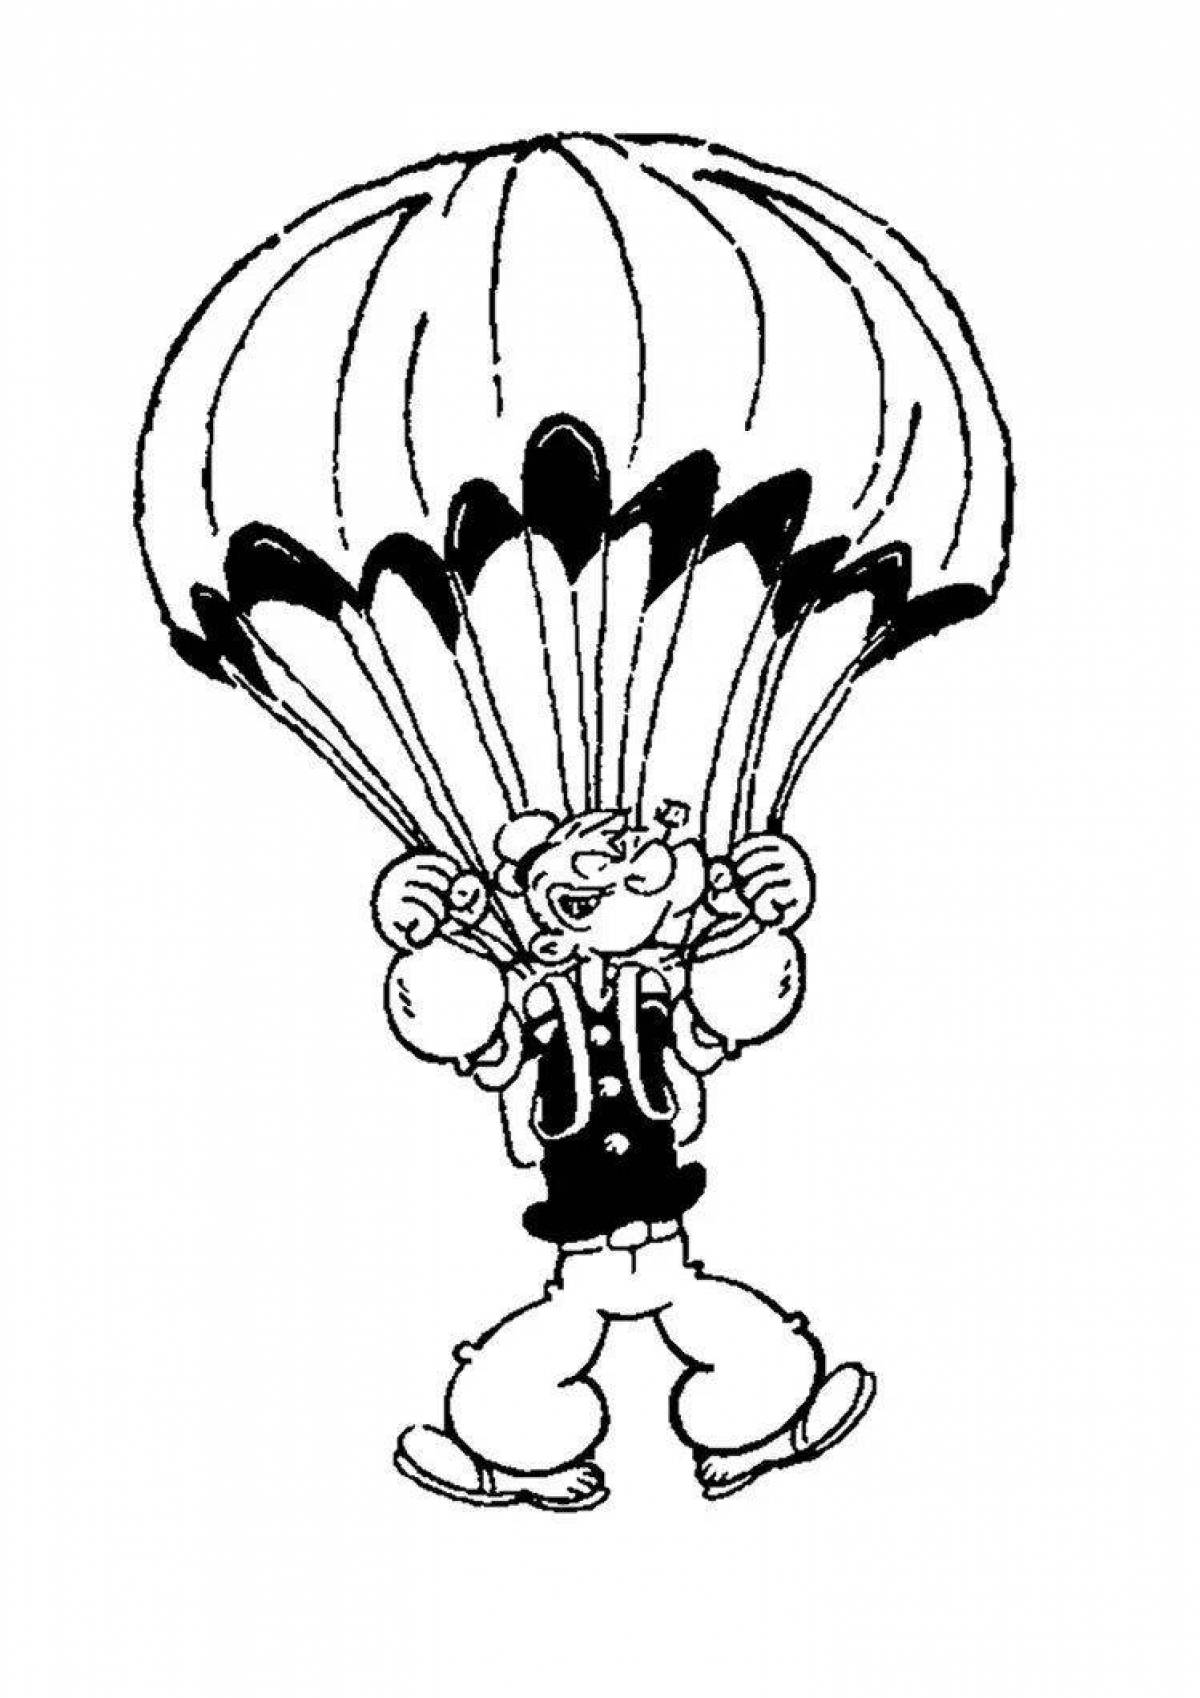 Adventure skydiver coloring pages for kids